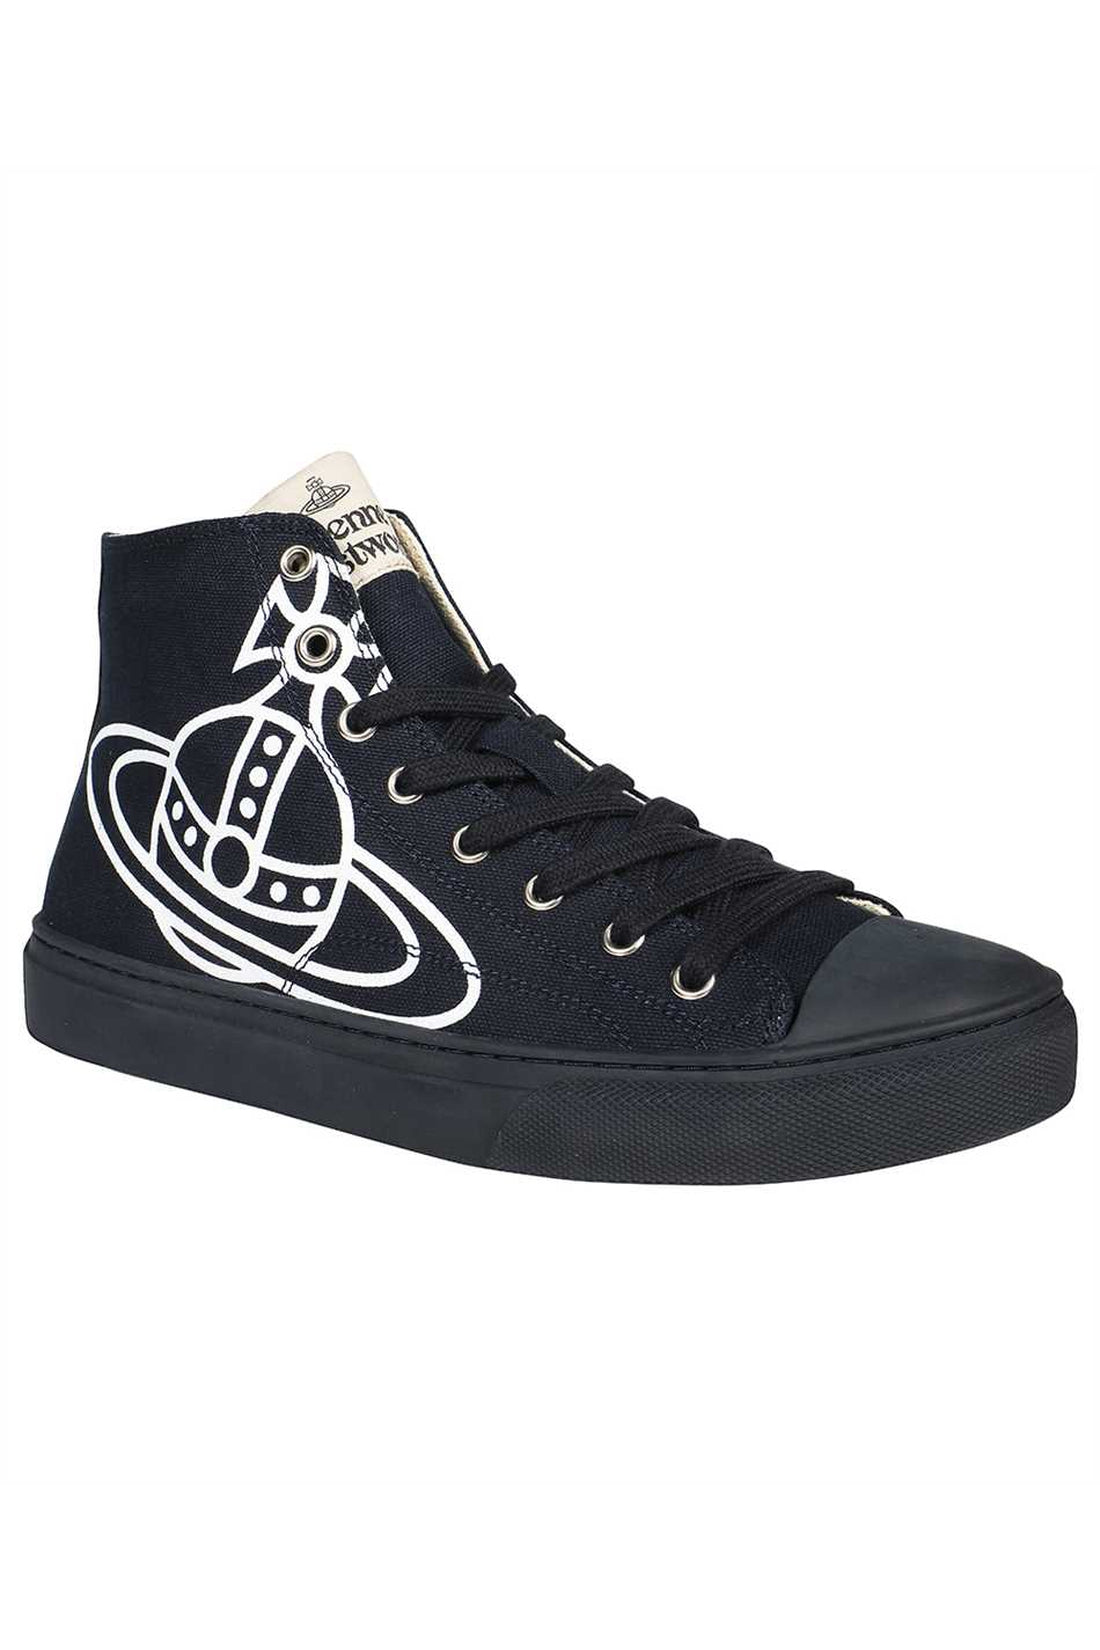 Vivienne Westwood-OUTLET-SALE-The Plimsoll high-top sneakers-ARCHIVIST